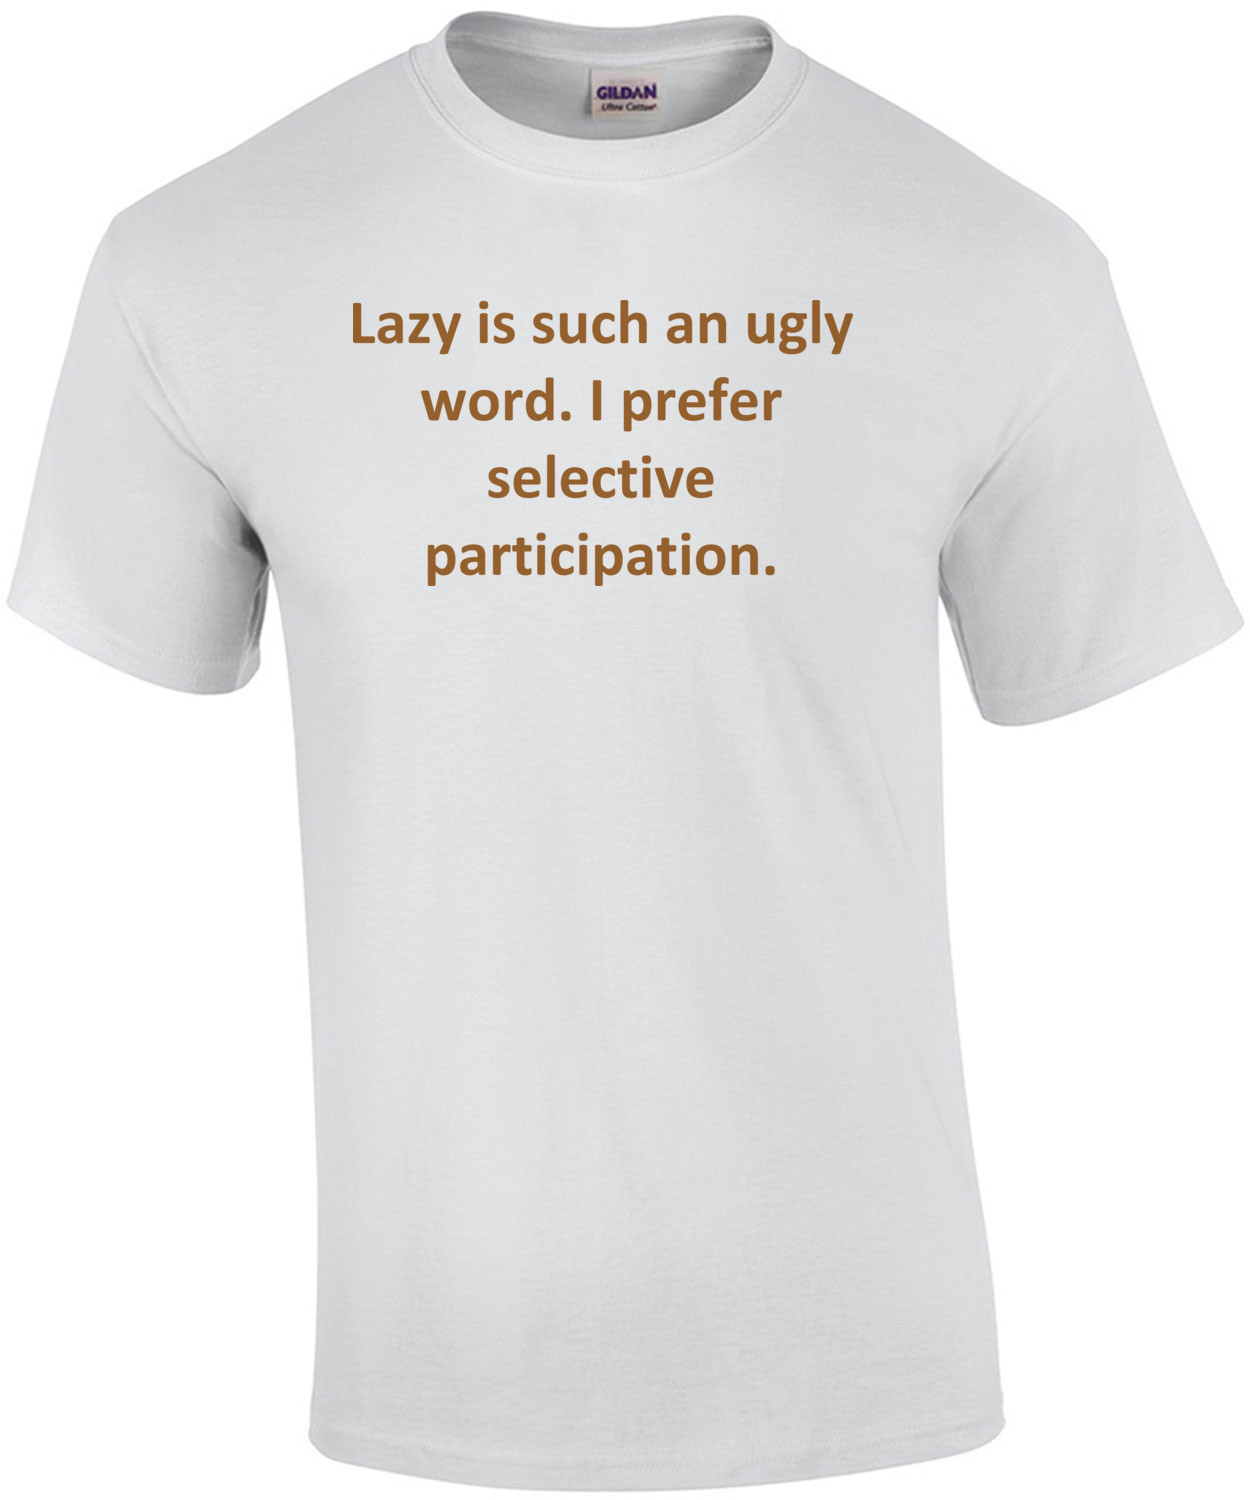 Lazy is such an ugly word. I prefer selective participation. Shirt